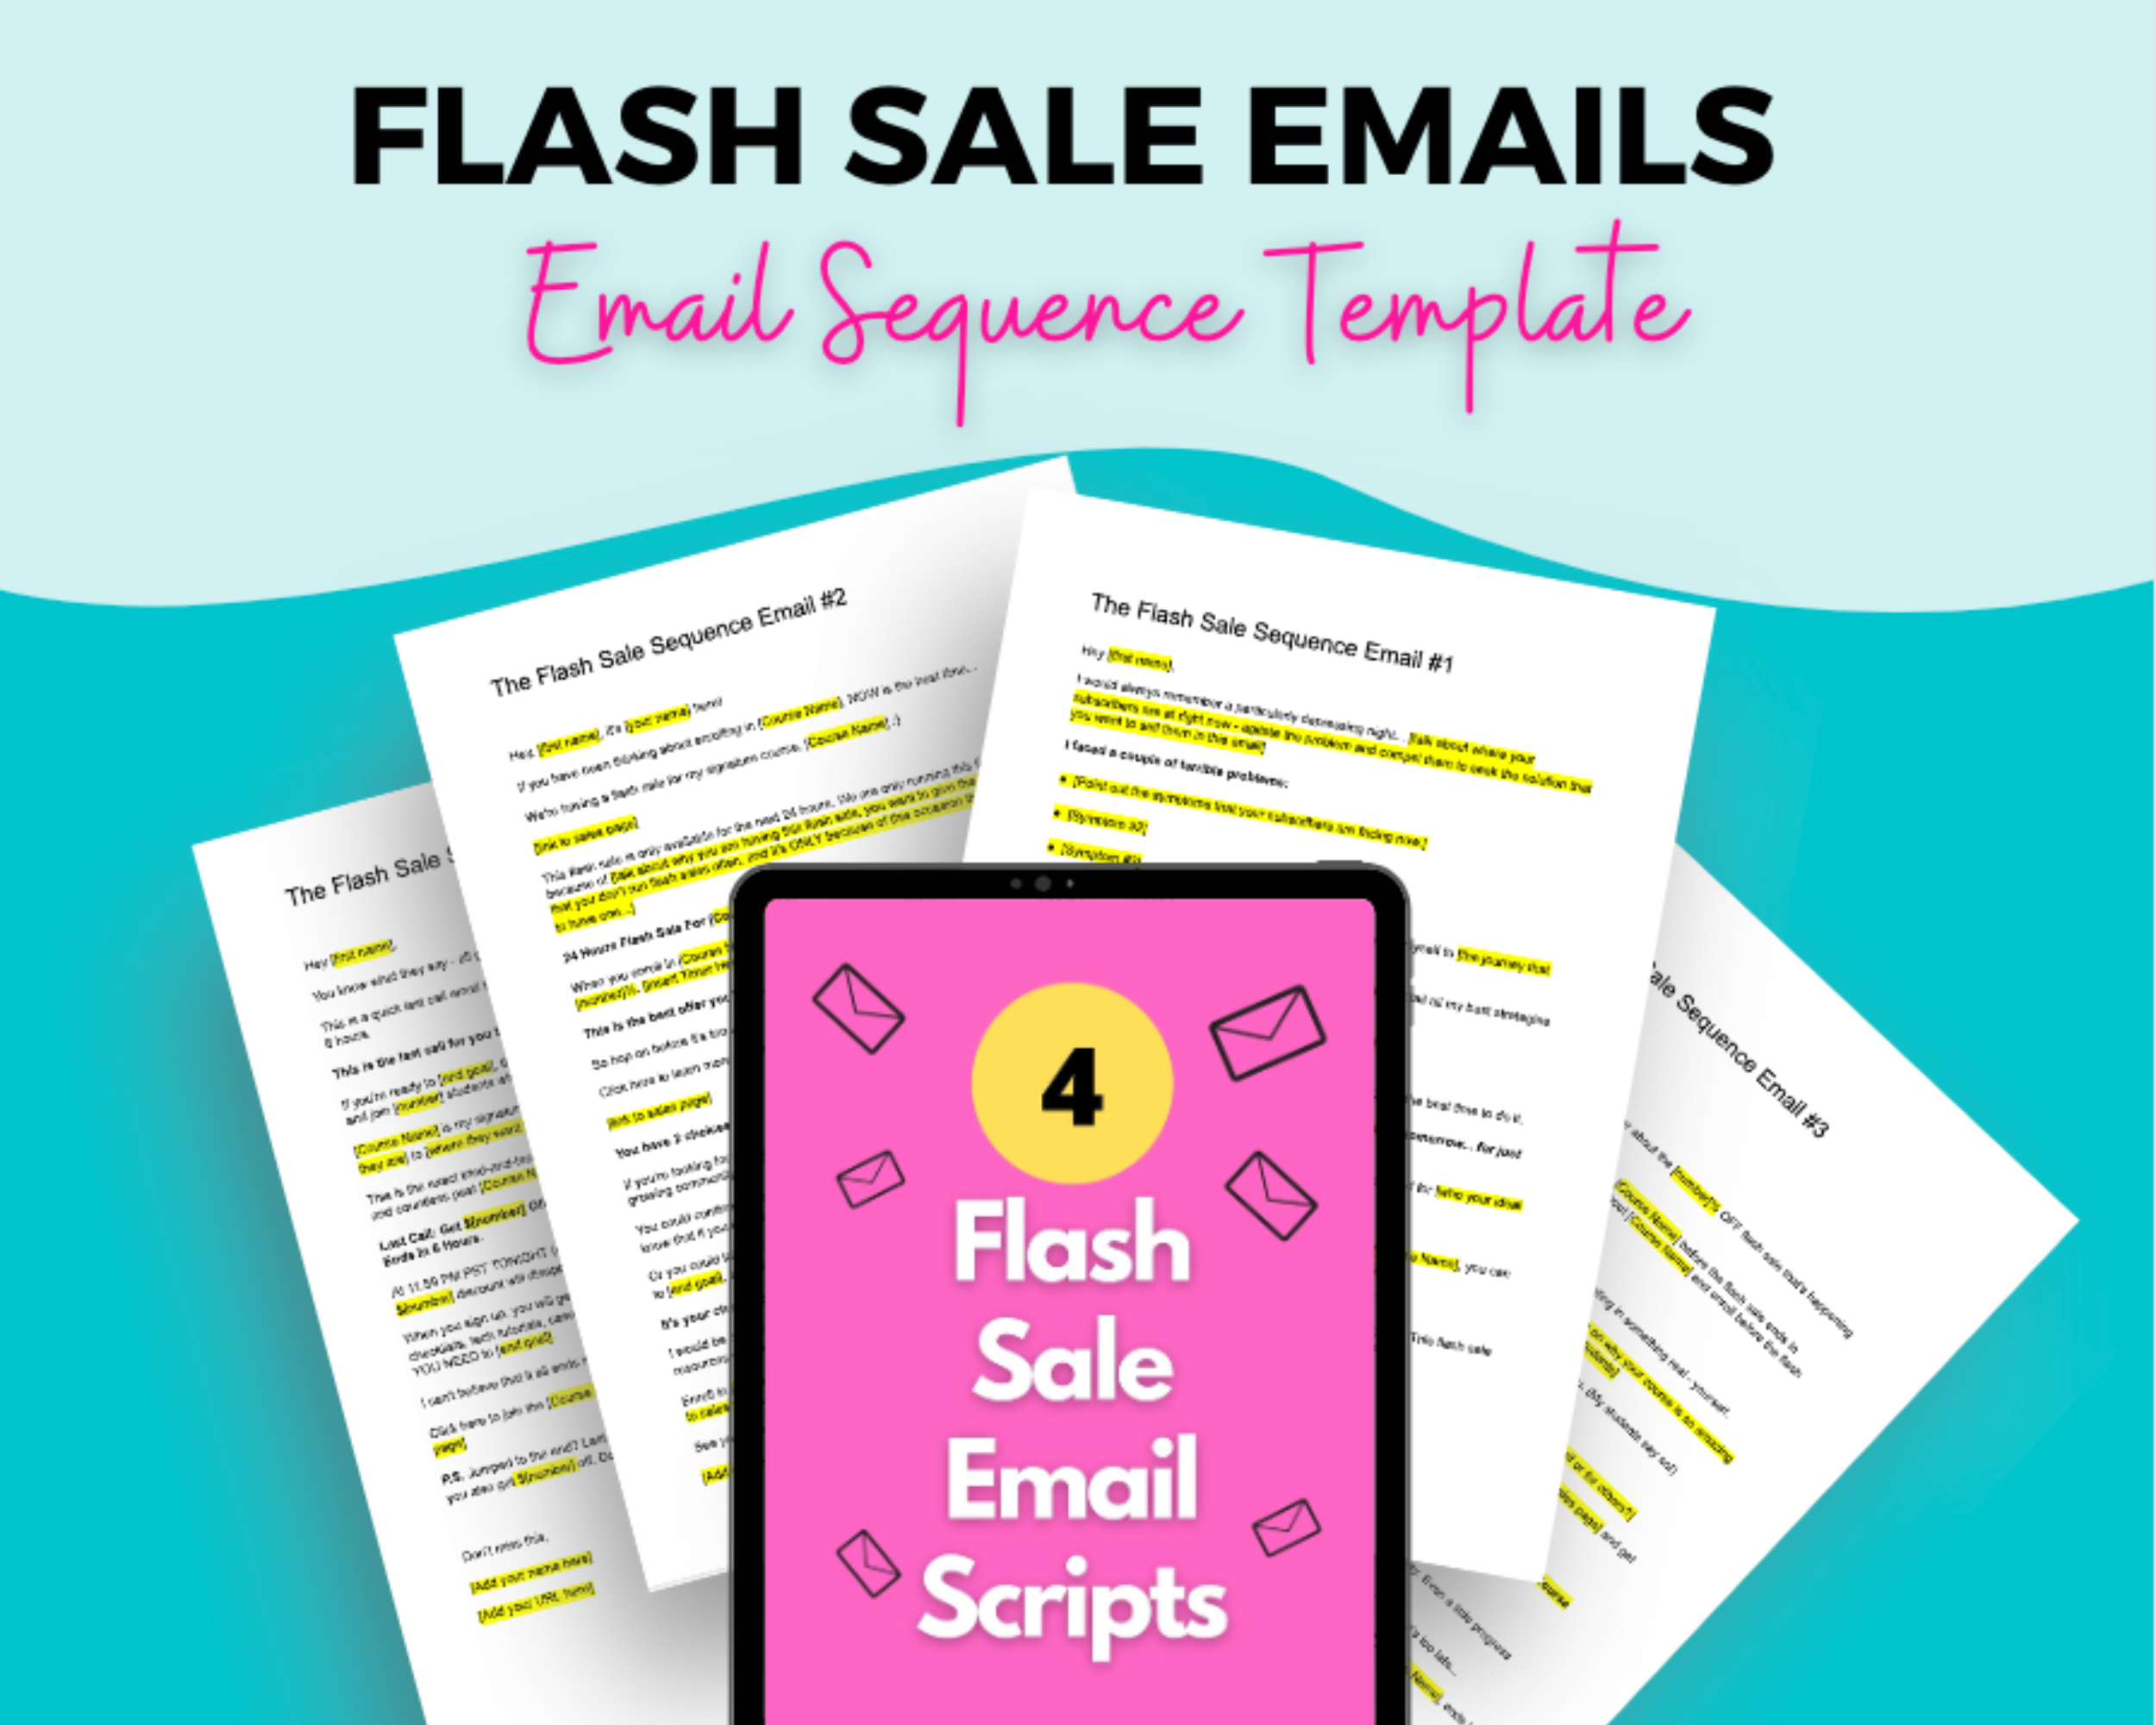 Flash Sale Email Sequence | Sales Email Template